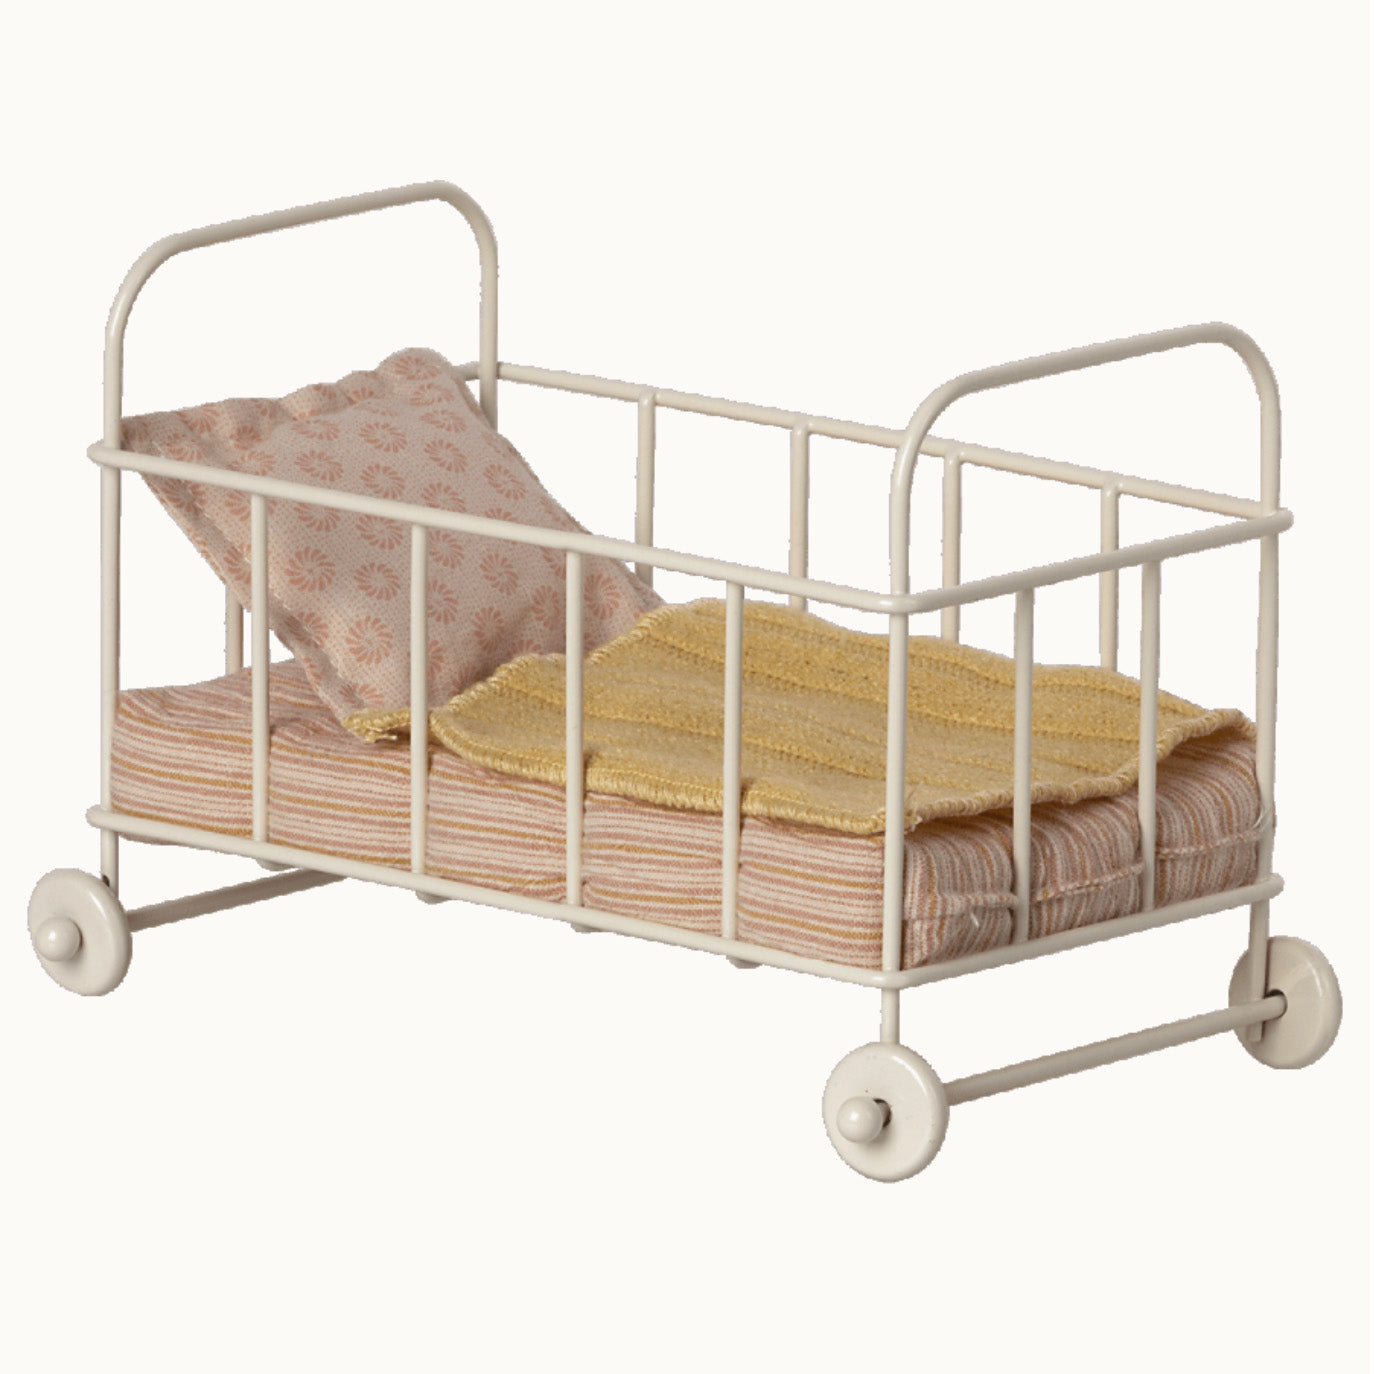 Maileg micro cot bed with mattress, pillow and blanket